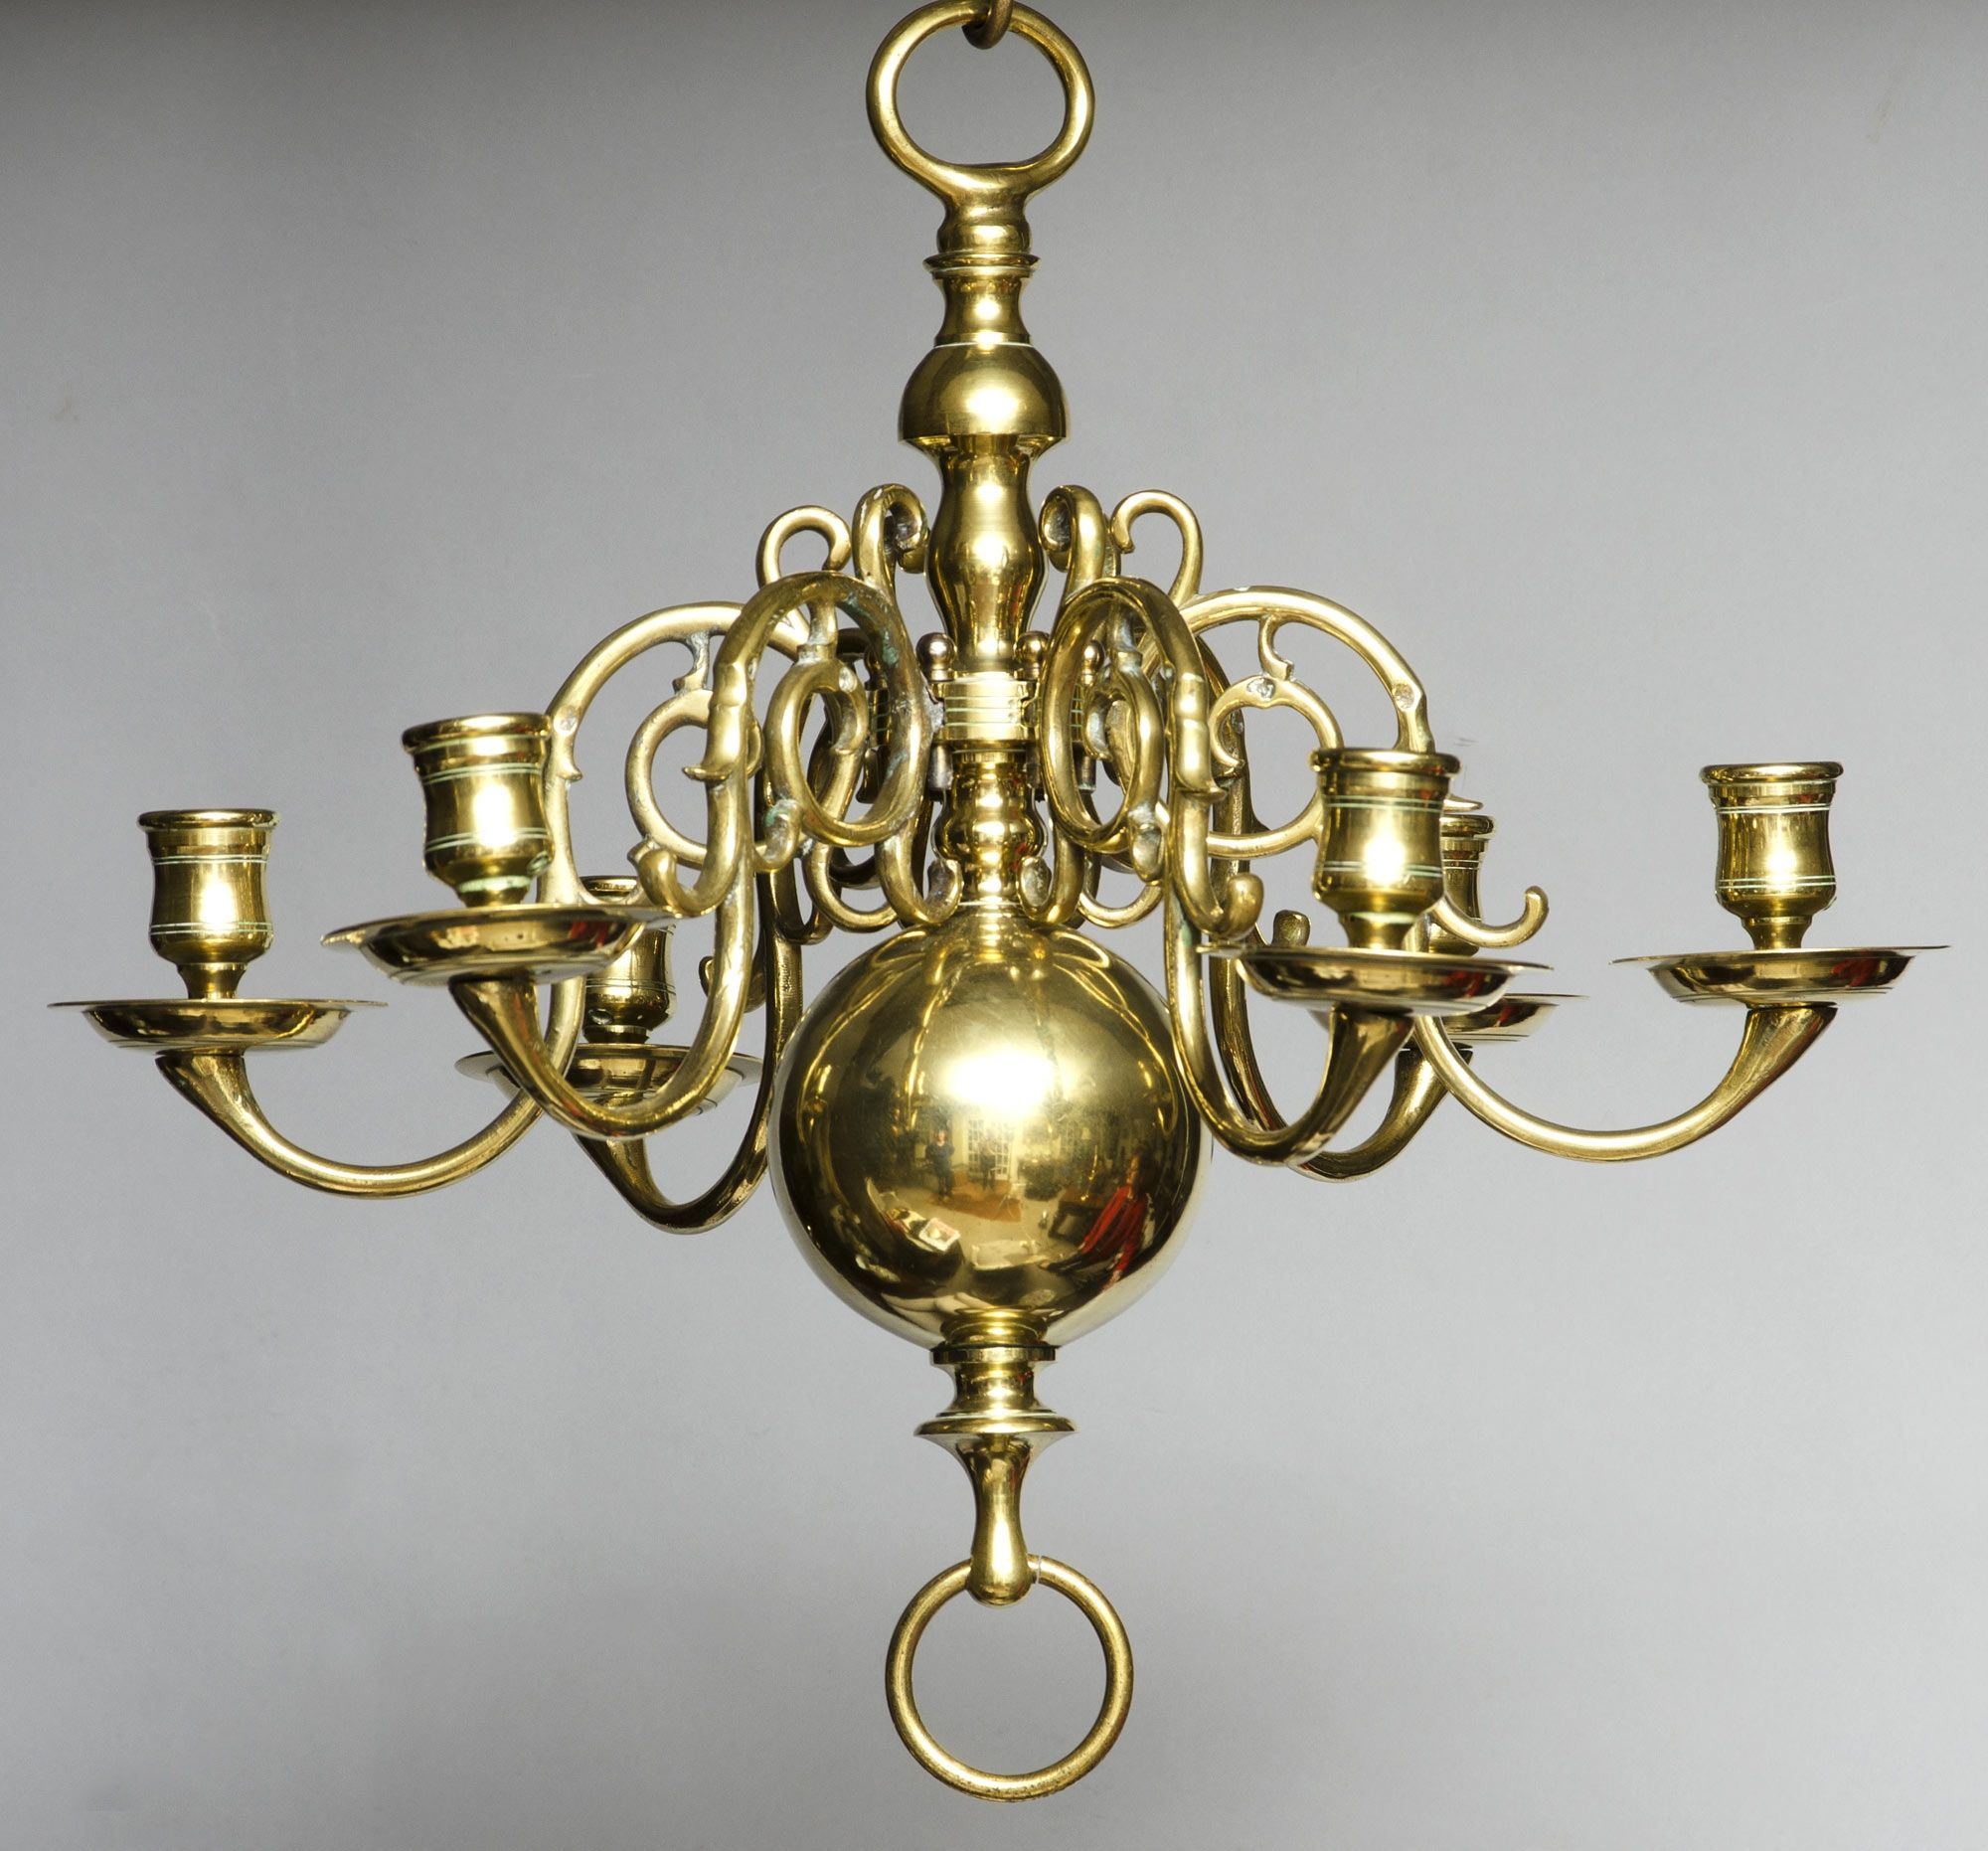 Brass Chandelier Vintage For Your Decorating Home Ideas With Brass Pertaining To Vintage Brass Chandeliers (View 9 of 12)